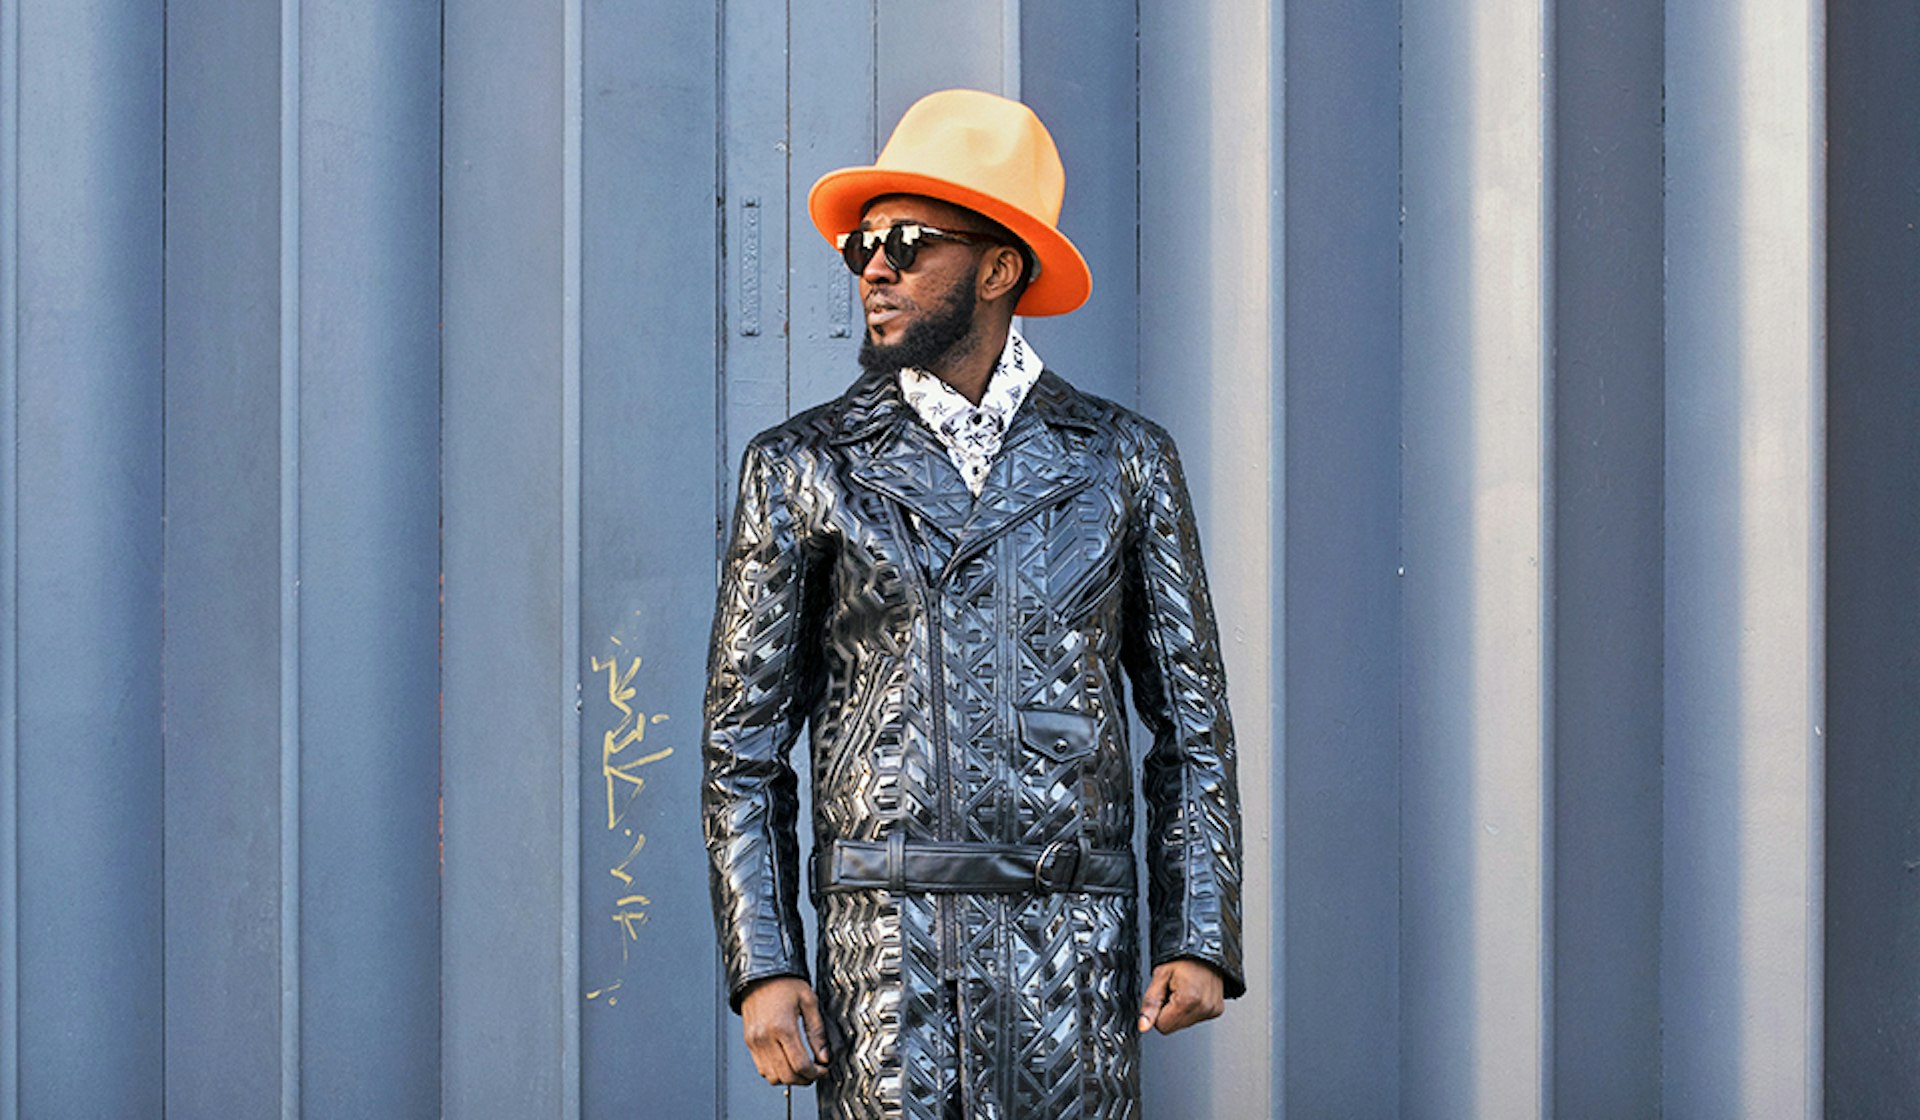 The Congolese dandies who see fashion as a way of life